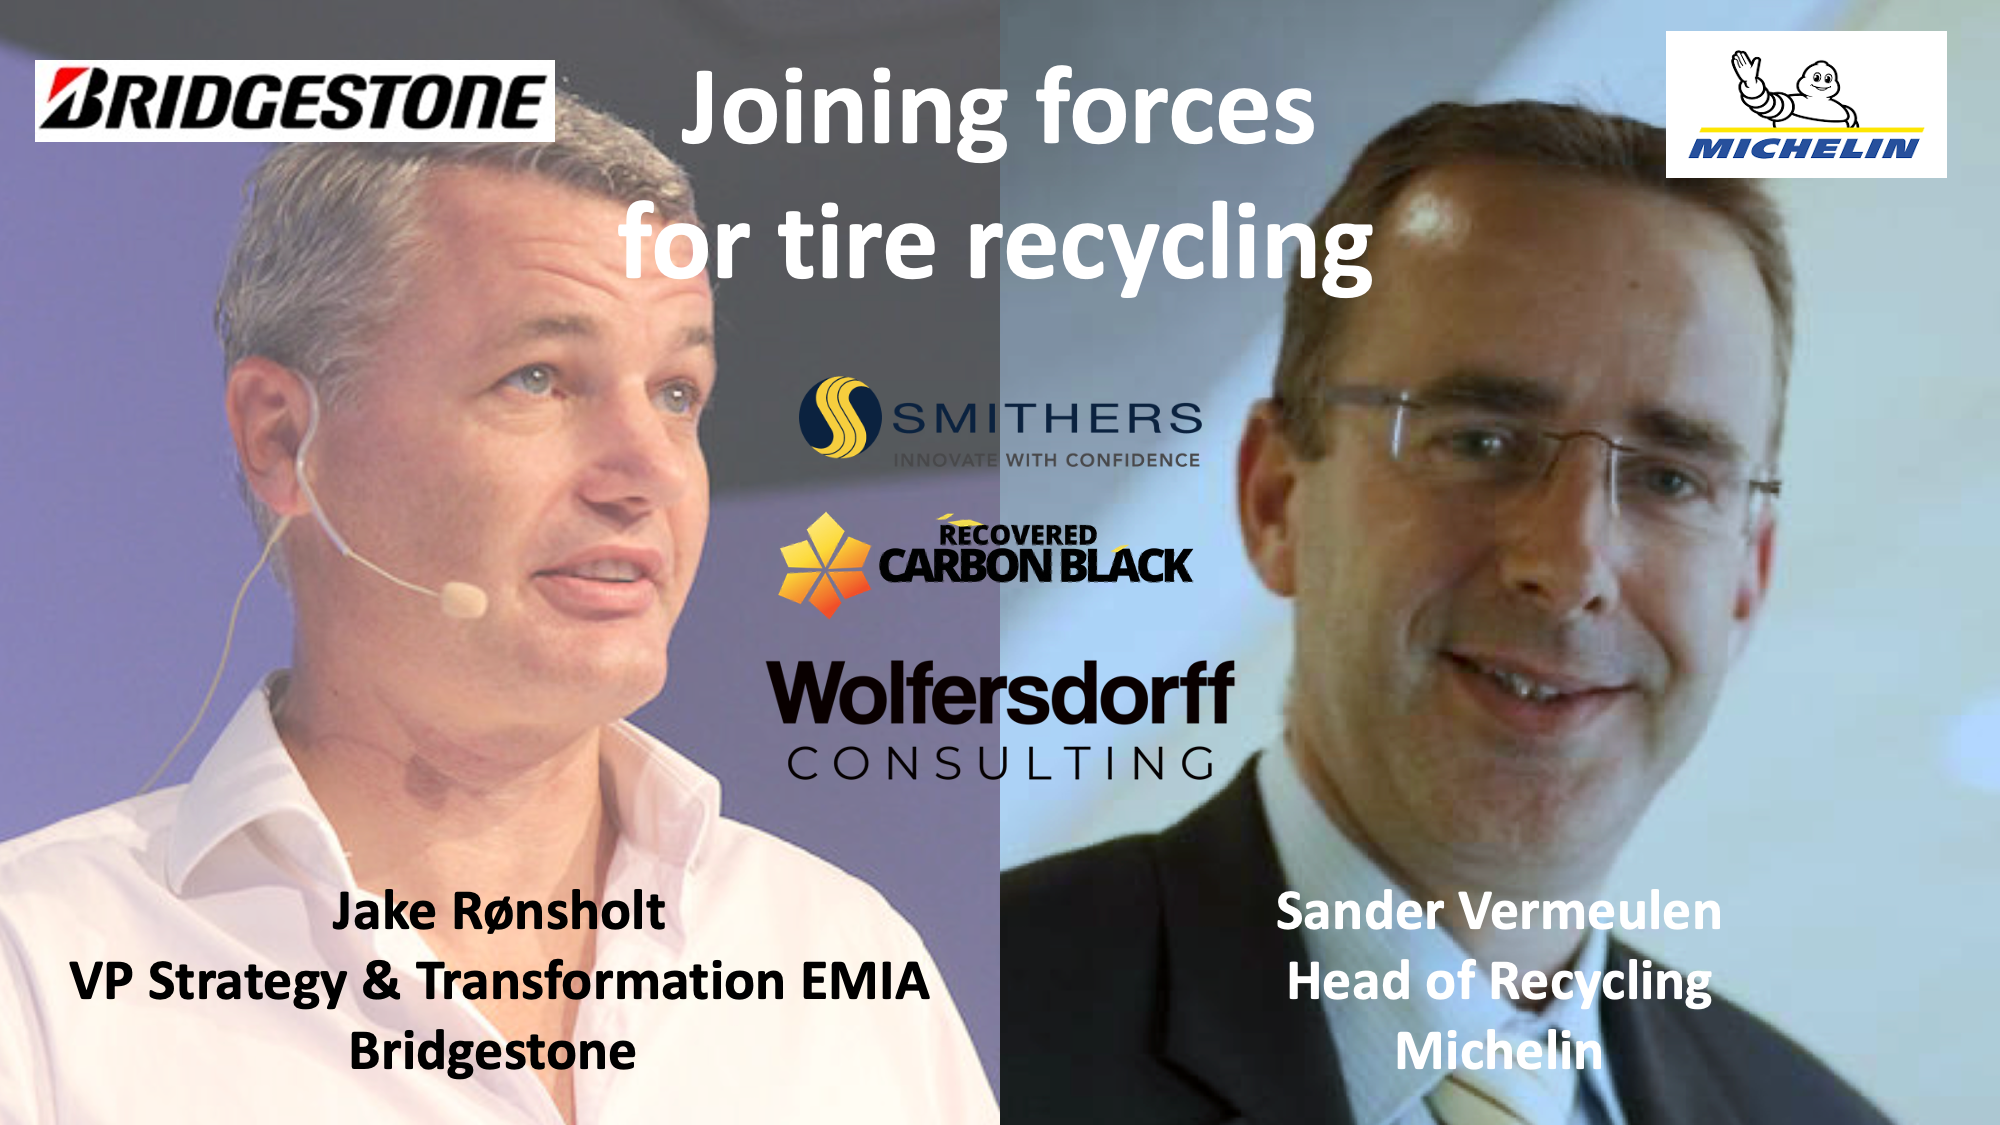 Wolfersdorff Consulting Berlin - Bridgestone and Michelin join forces for tire recycling